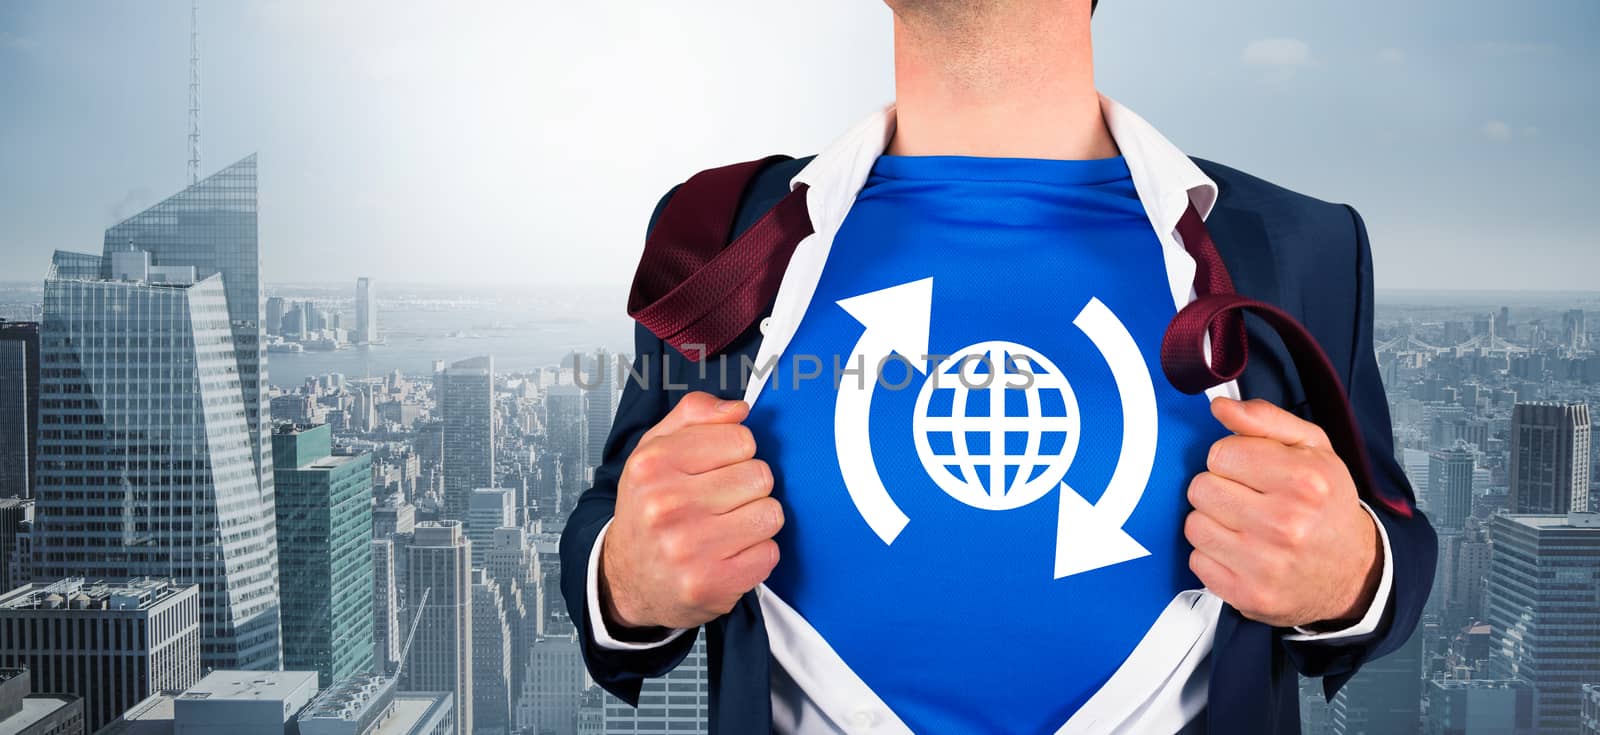 Composite image of businessman opening his shirt superhero style against cityscape